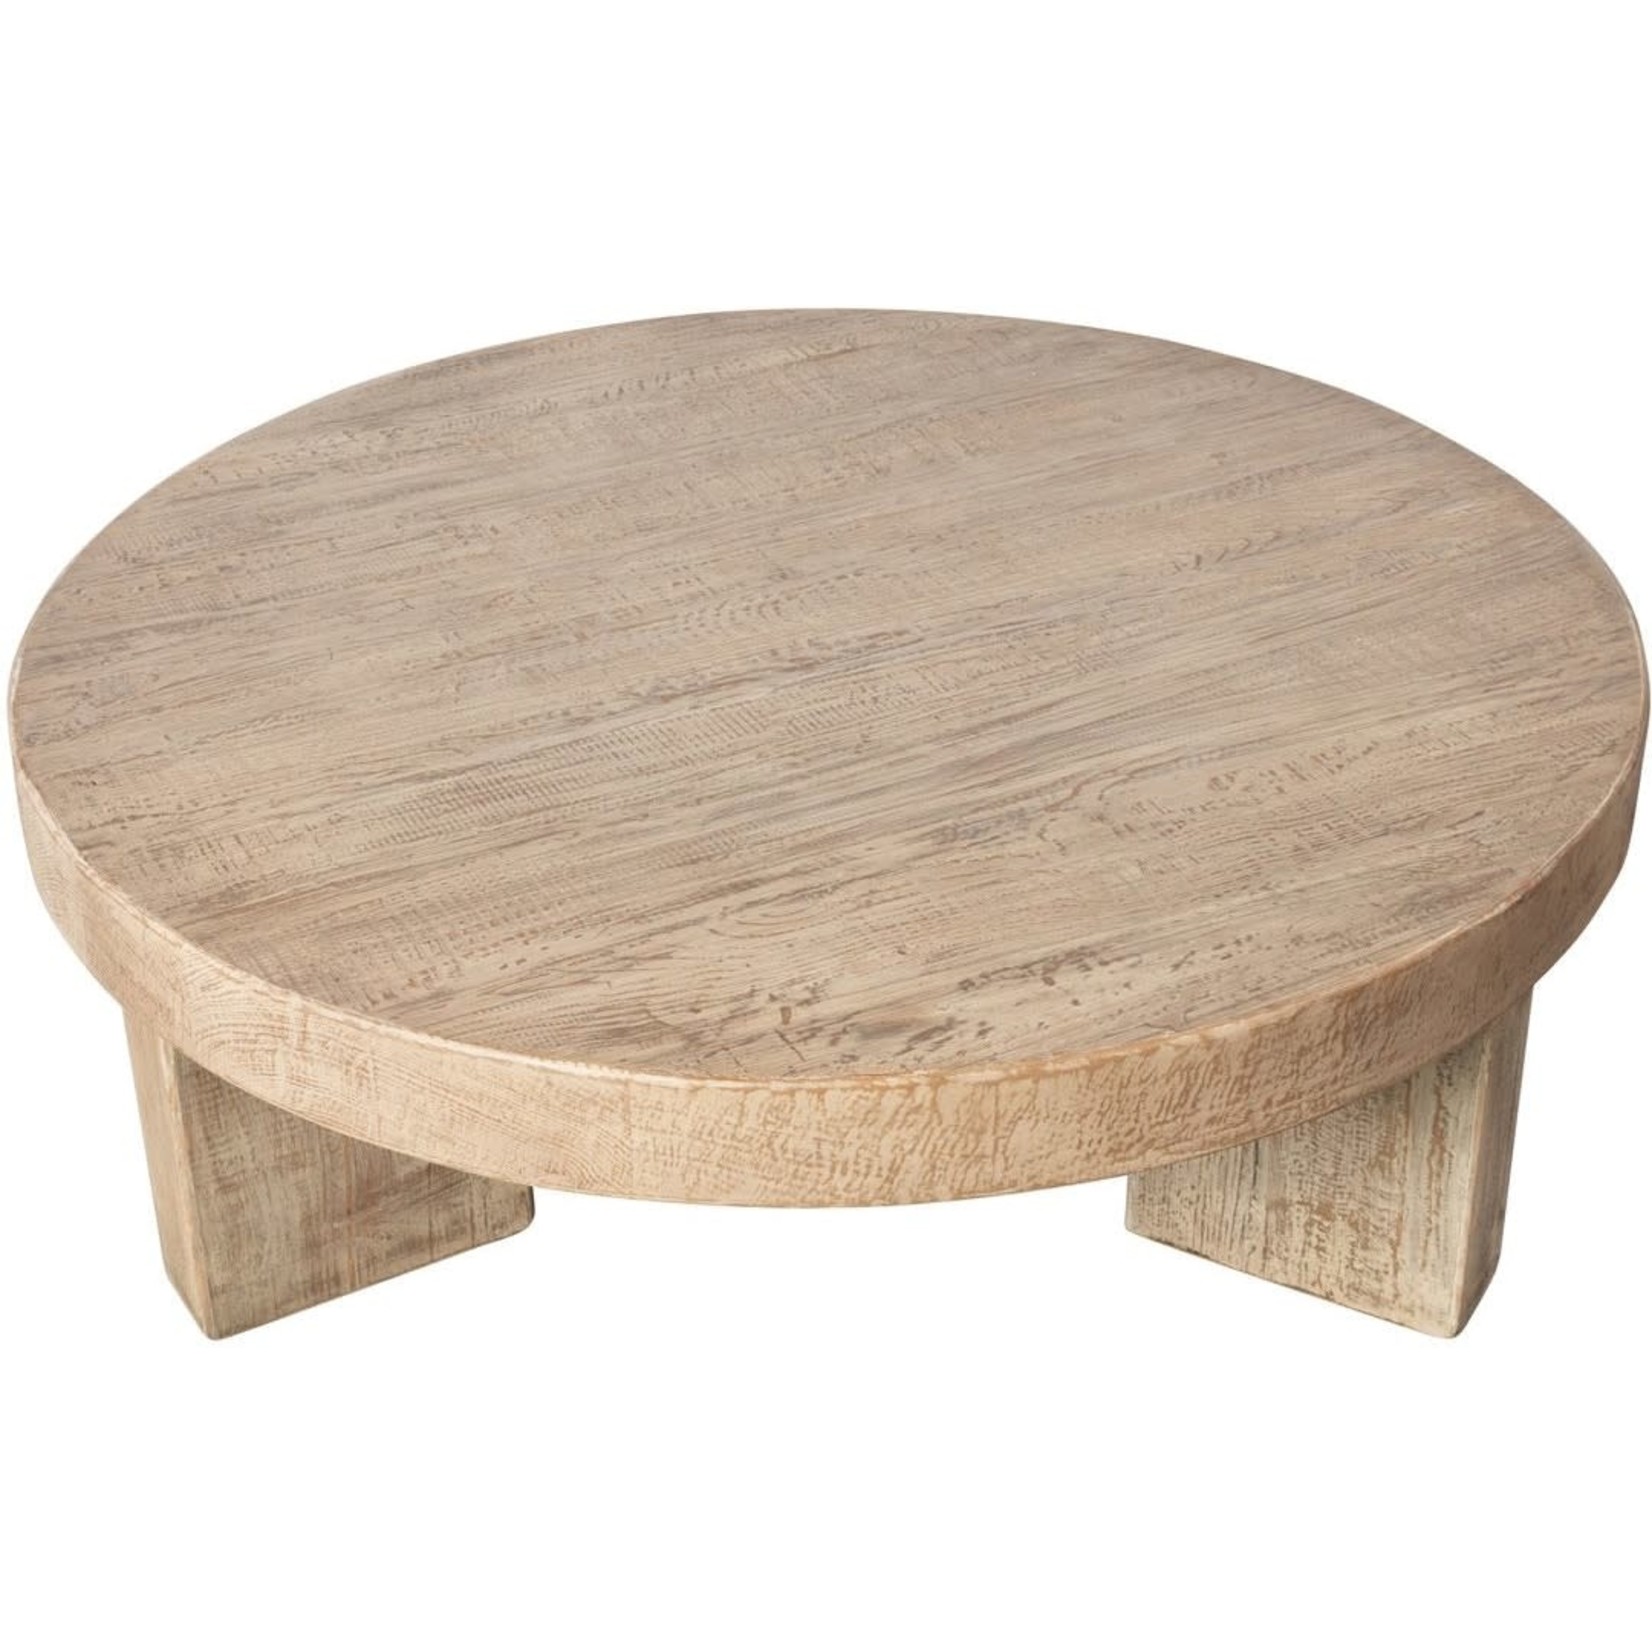 Classic Home Brooke Round Coffee Table